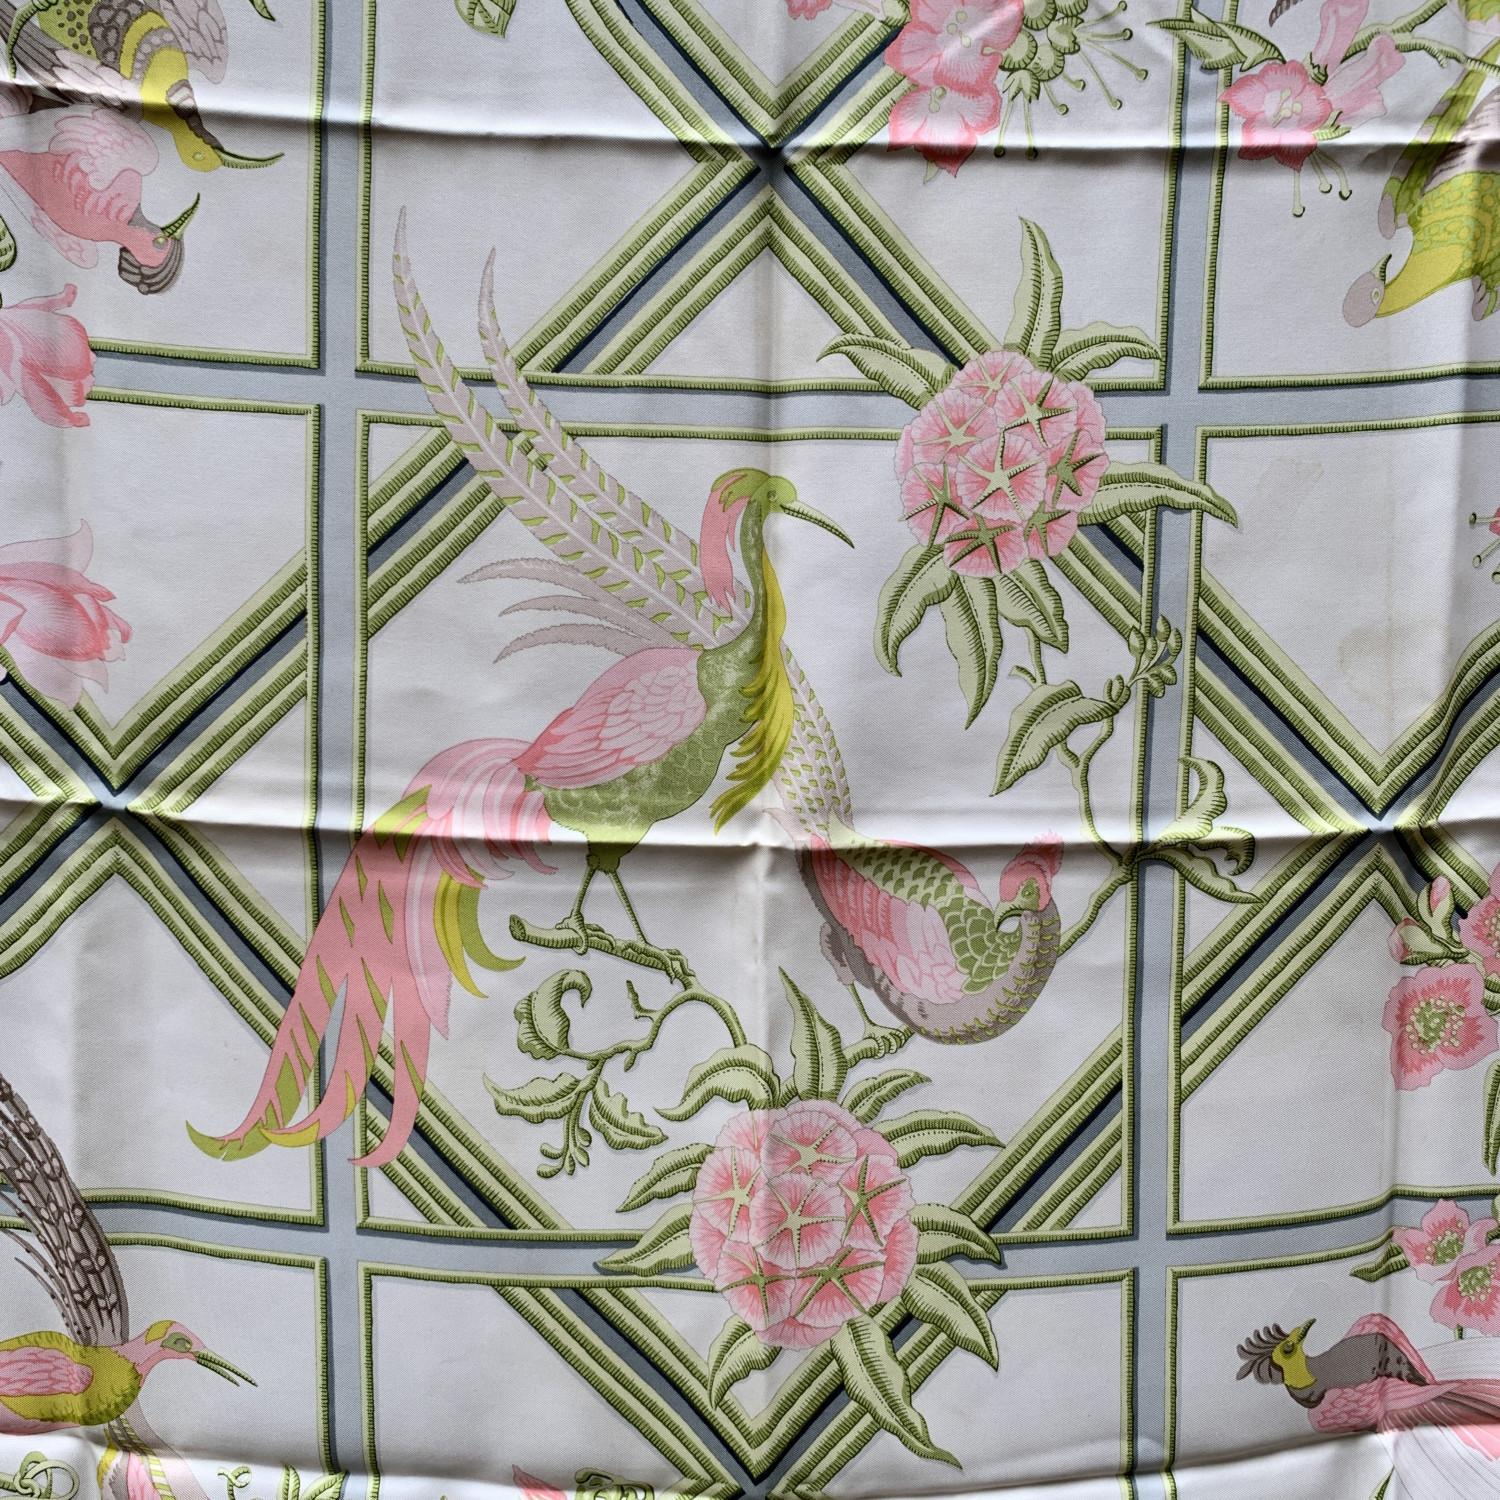 Vintage Hermes silk scarf titled 'Caraibes' designed by Christiane Vauzelles, and first issed in 1974 . It has various birds and flower in baby pink colorway on white background. It is signed 'Hermes, Paris' with copyright symbol. It has the